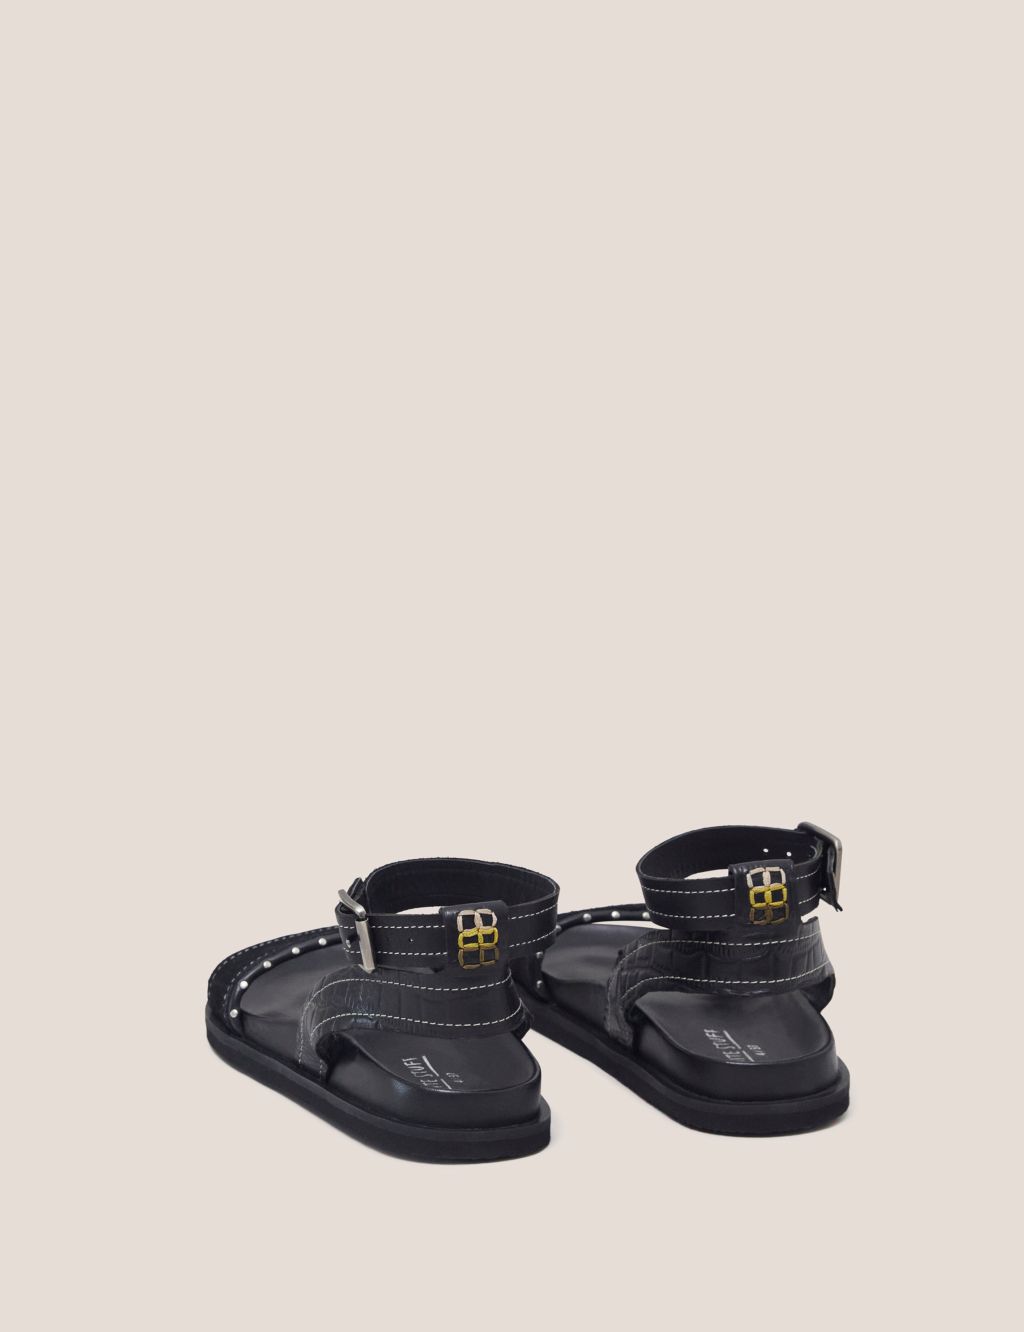 Leather Buckle Ankle Strap Flat Sandals image 3